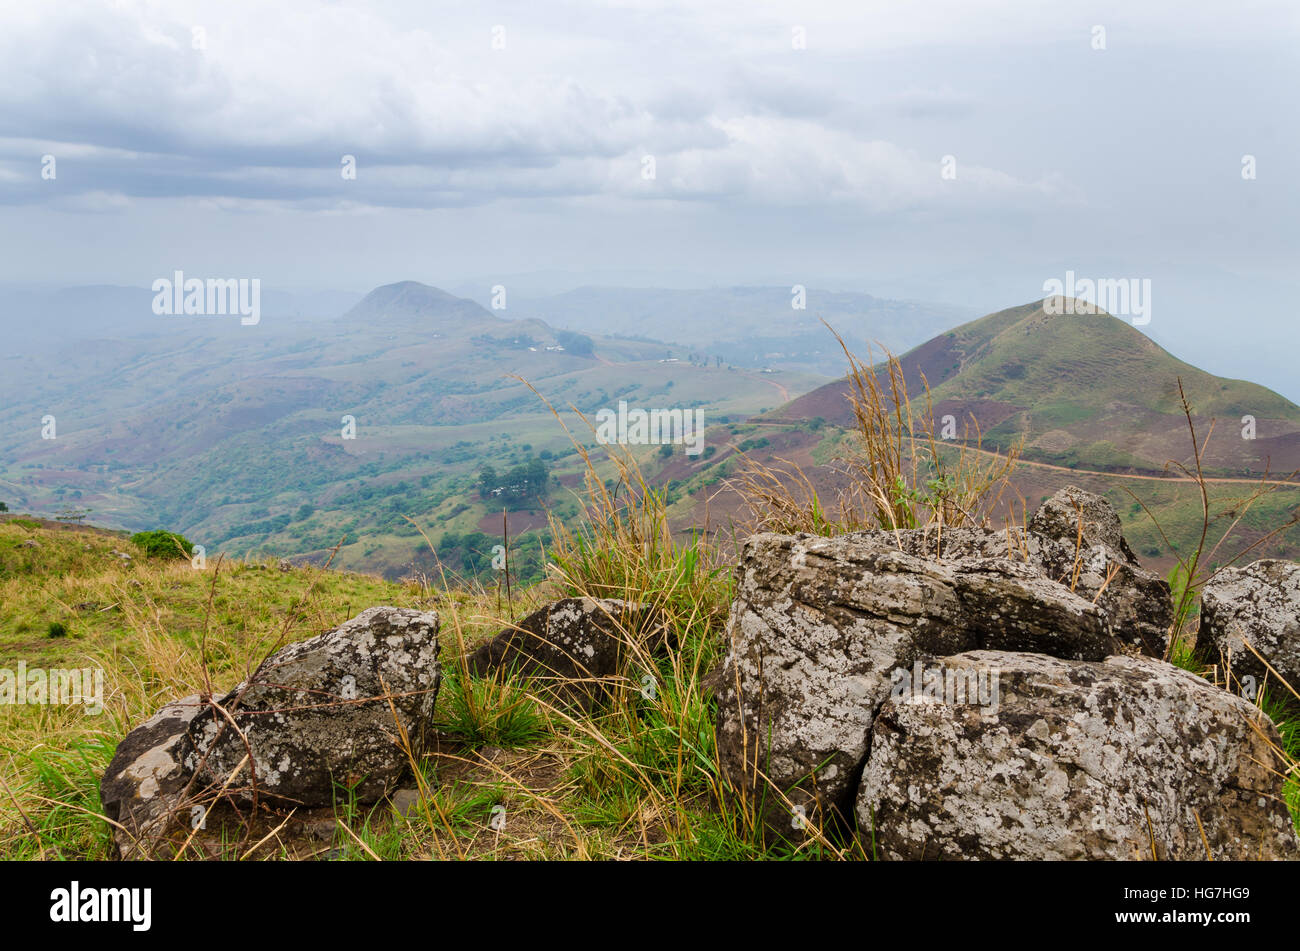 The Ring Road in Cameroon, Africa with soft hills in background and large rocks in foreground on overcast day Stock Photo